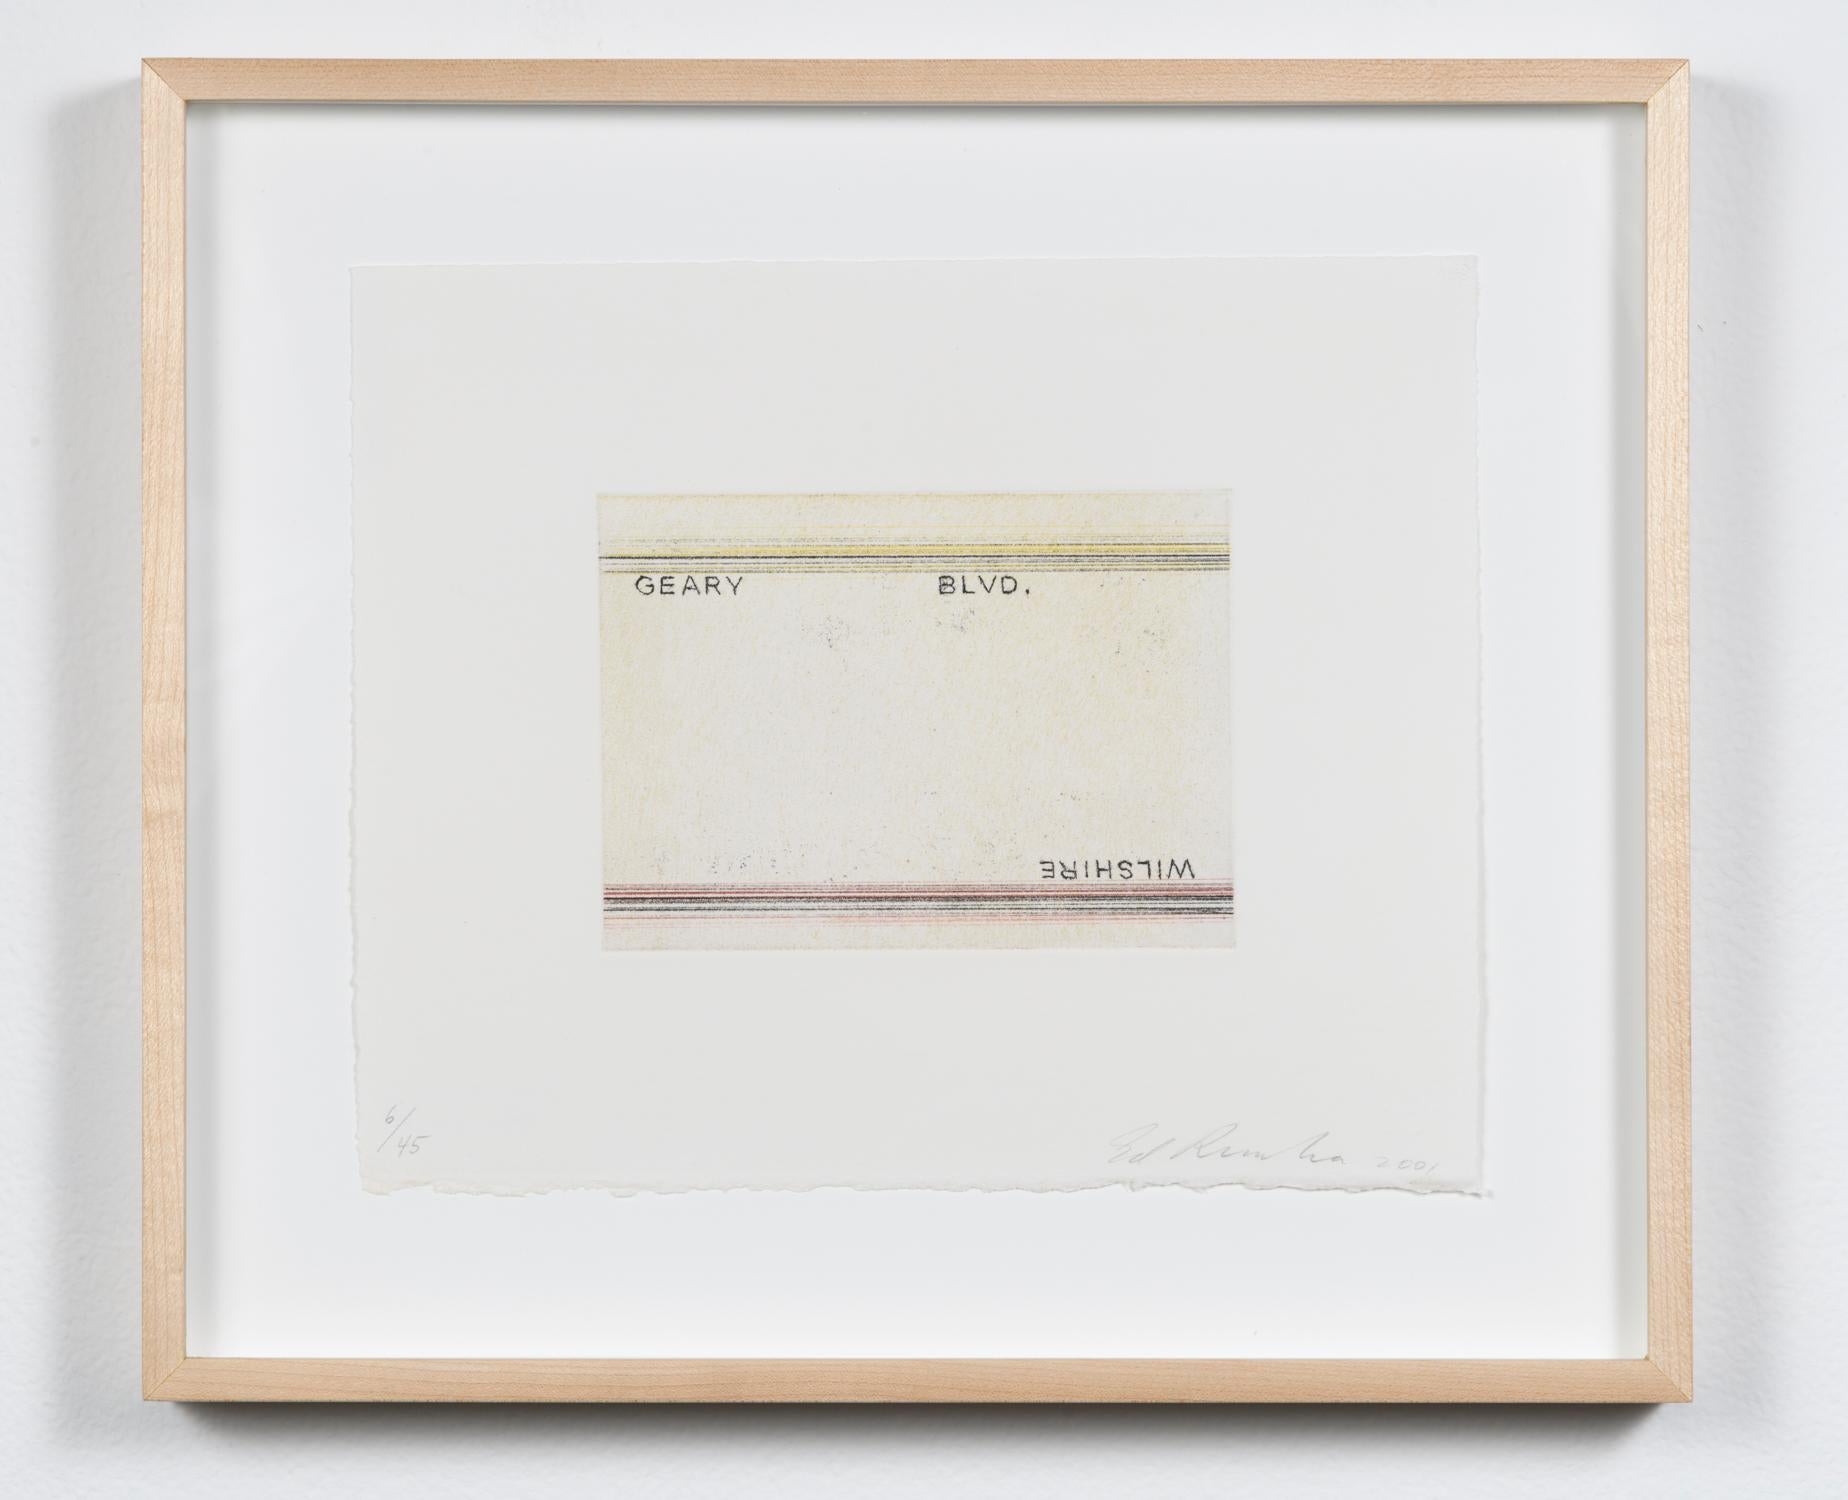 Geary, Wilshire, from Los Francisco San Angeles - Contemporary Print by Ed Ruscha